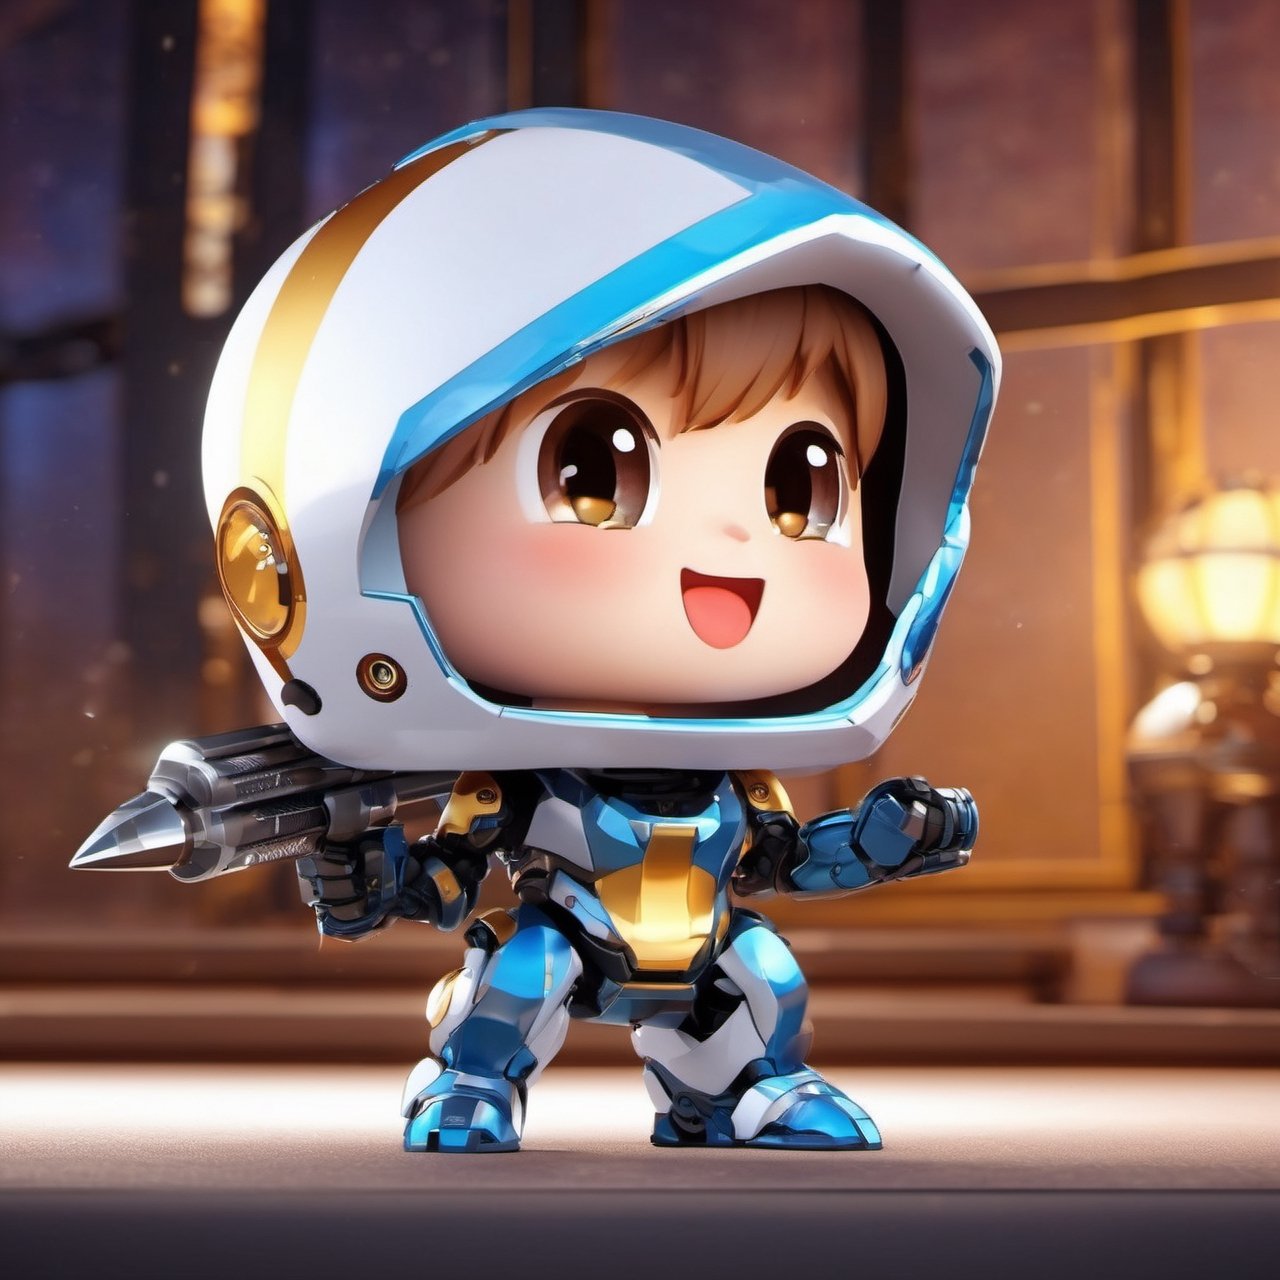 (masterpiece:1.2, highest quality), (realistic, photo_realistic:1.9)
1chibi_robot, Cute chibi robot, Designer look holding a pencil in one hand, white with blue, (detailed background), (gradients), colorful, detailed landscape, visual key, shiny skin. Modern place, Action camera. Portrait film. Standard lens. Golden hour lighting.
sharp focus, 8k, UHD, high quality, frowning, intricate detailed, highly detailed, hyper-realistic,interior,happy onion Chibi,chibi emote style